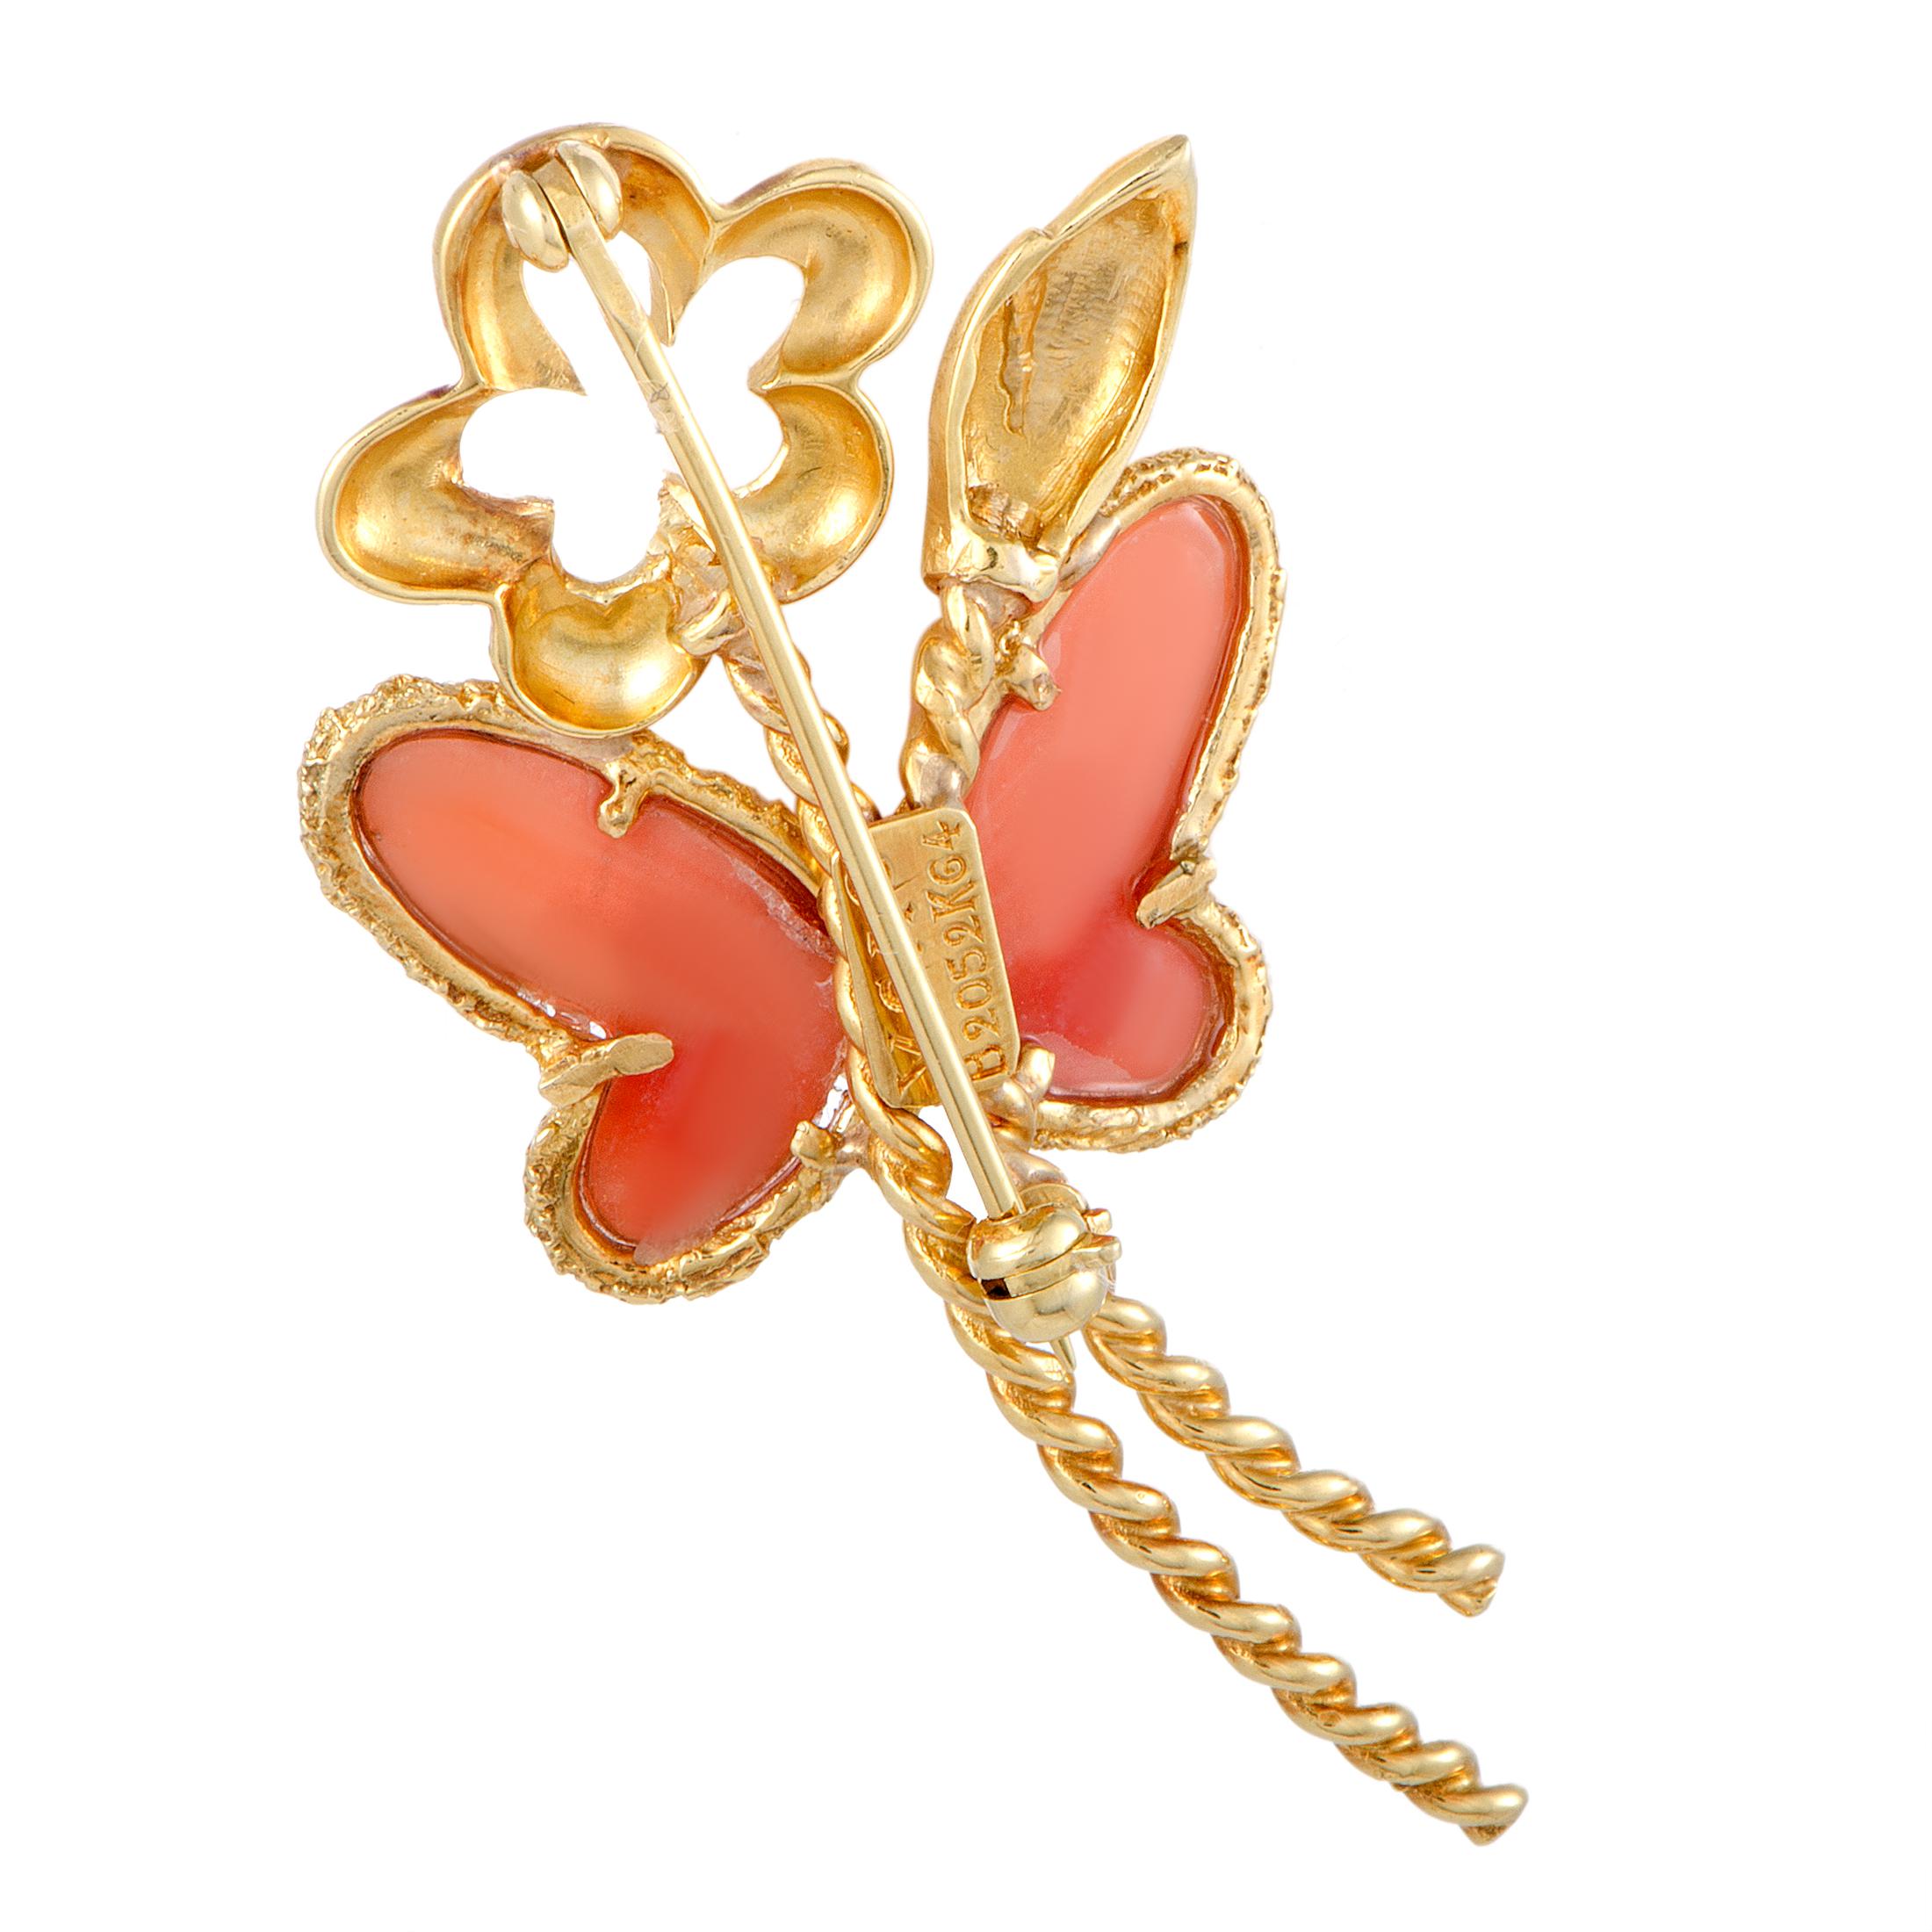 This vintage Van Cleef & Arpels brooch is made out of 18K yellow gold, diamond and coral. The brooch weighs 7.1 grams and measures 2.00” in length and 1.00” in width.

Offered in estate condition, this jewelry piece includes the manufacturer’s box.